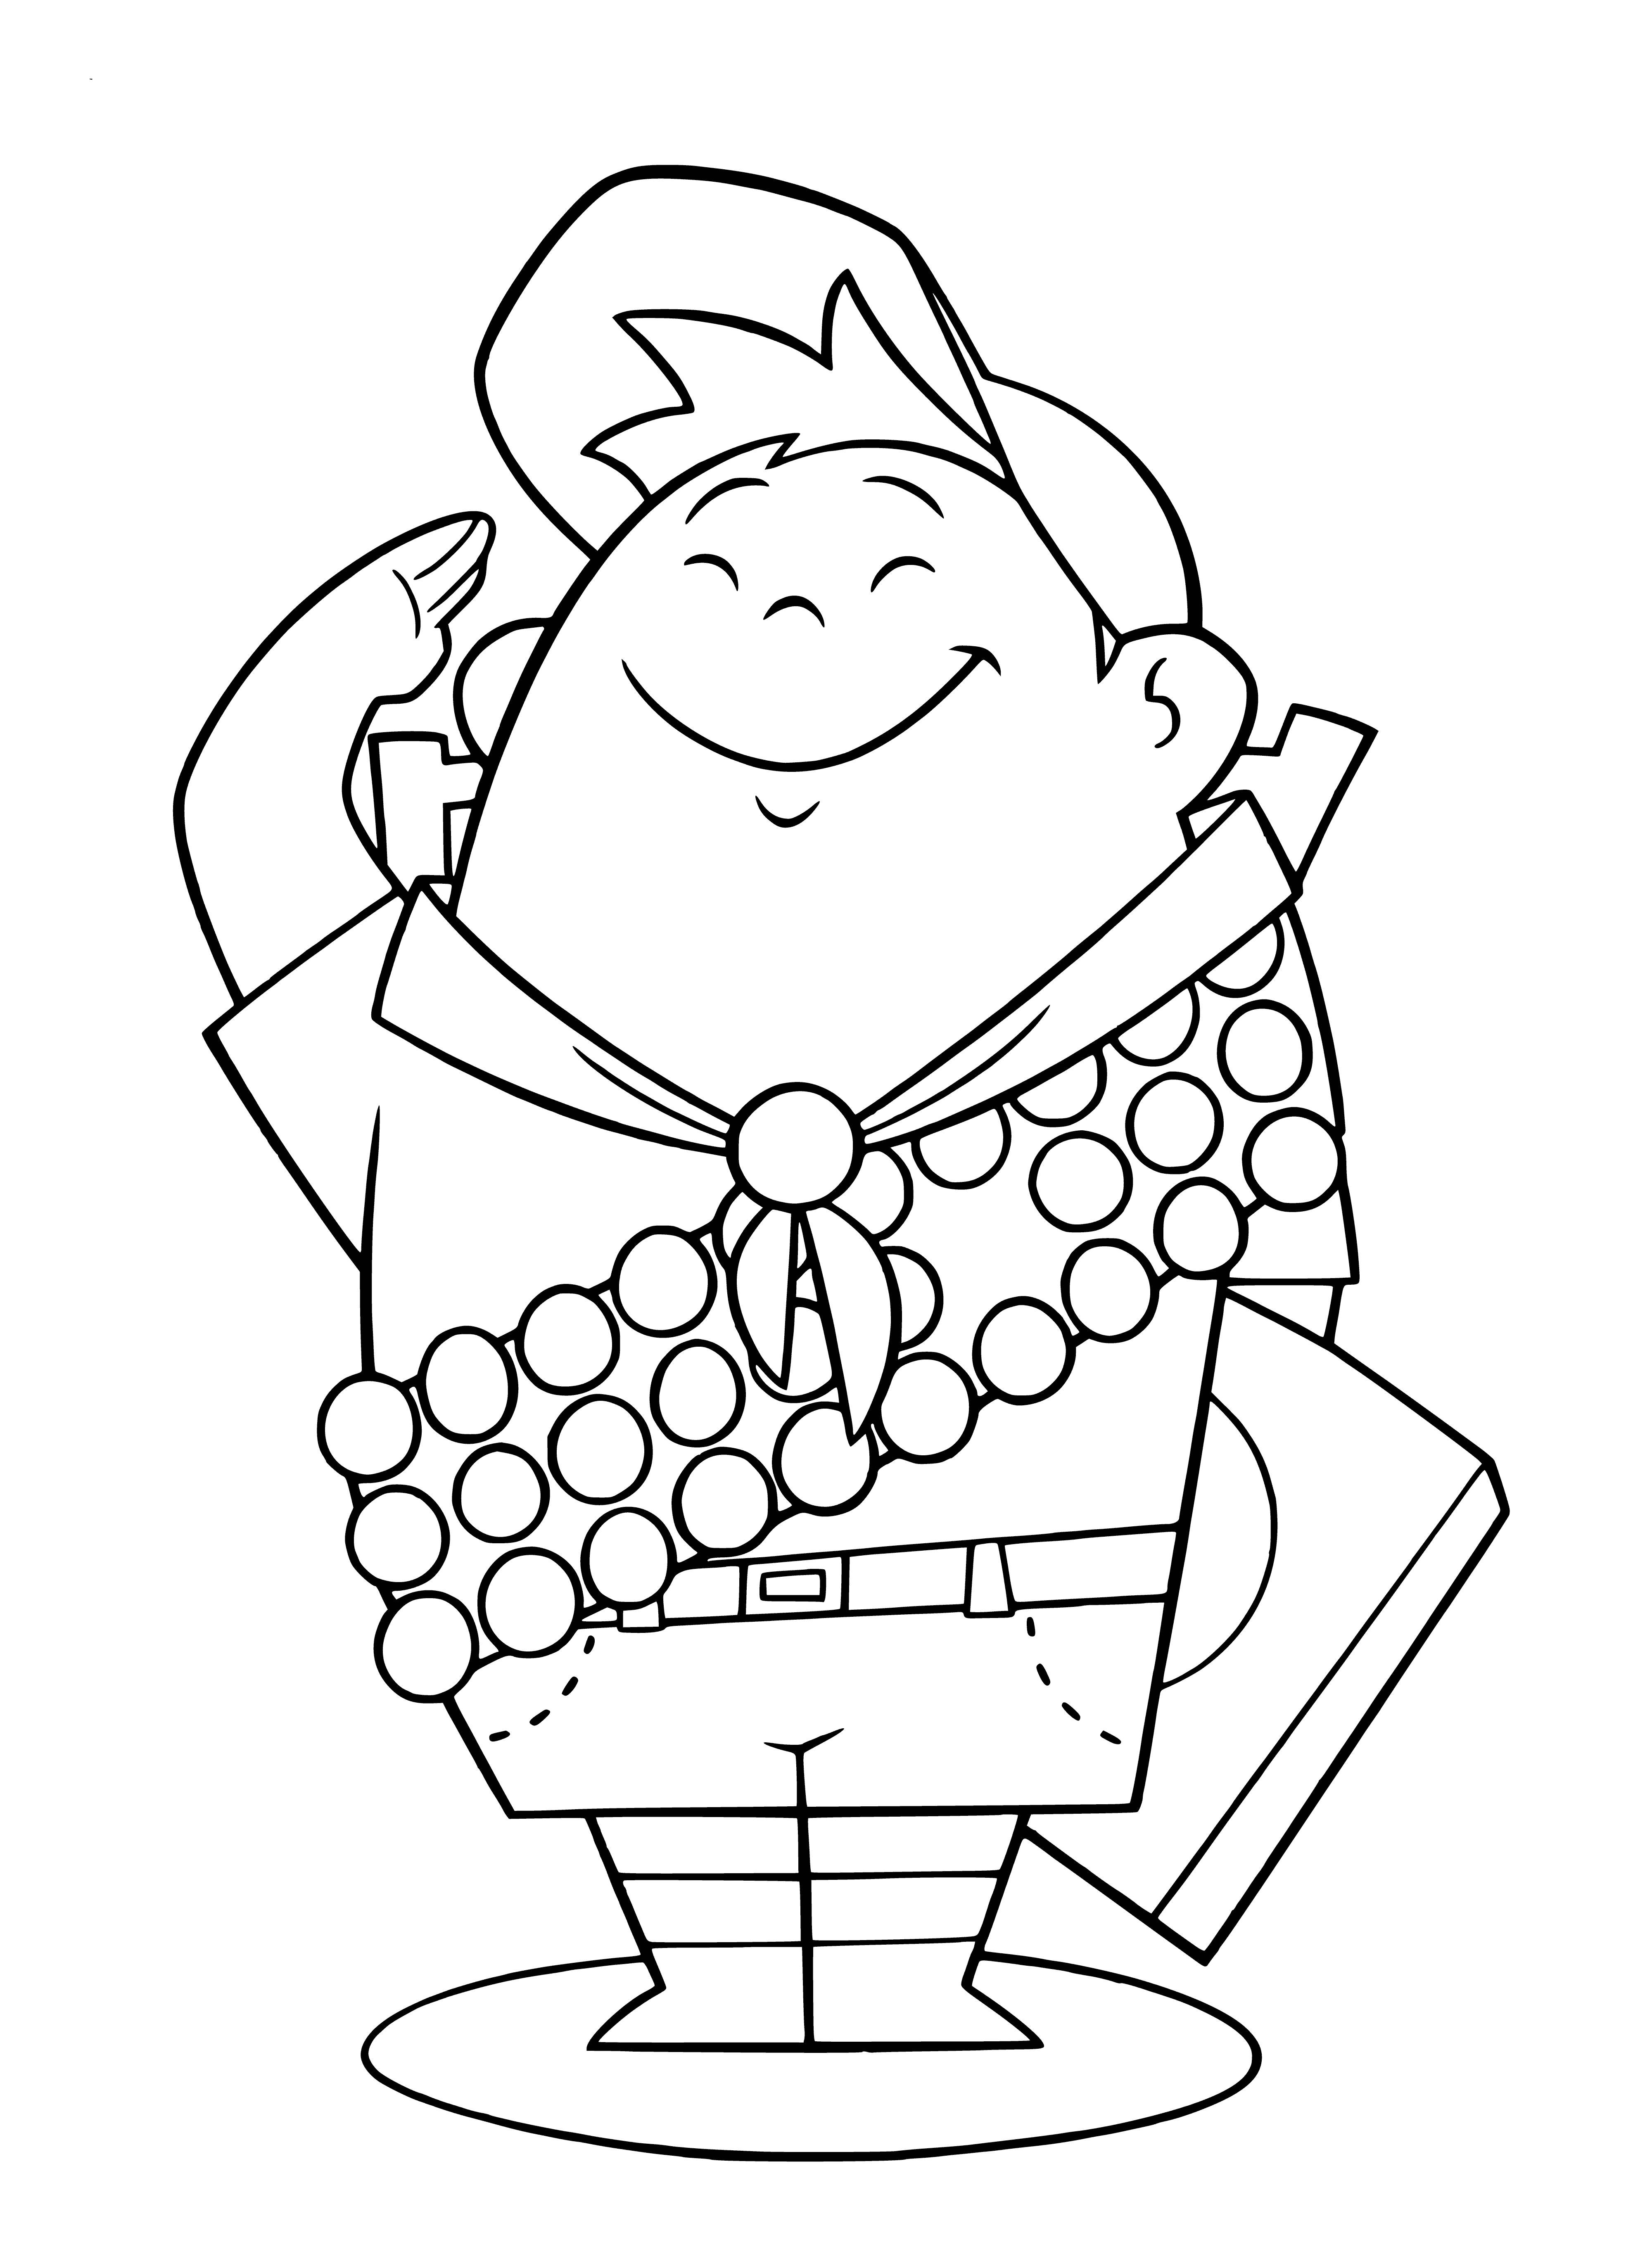 Russell Boy Scout coloring page